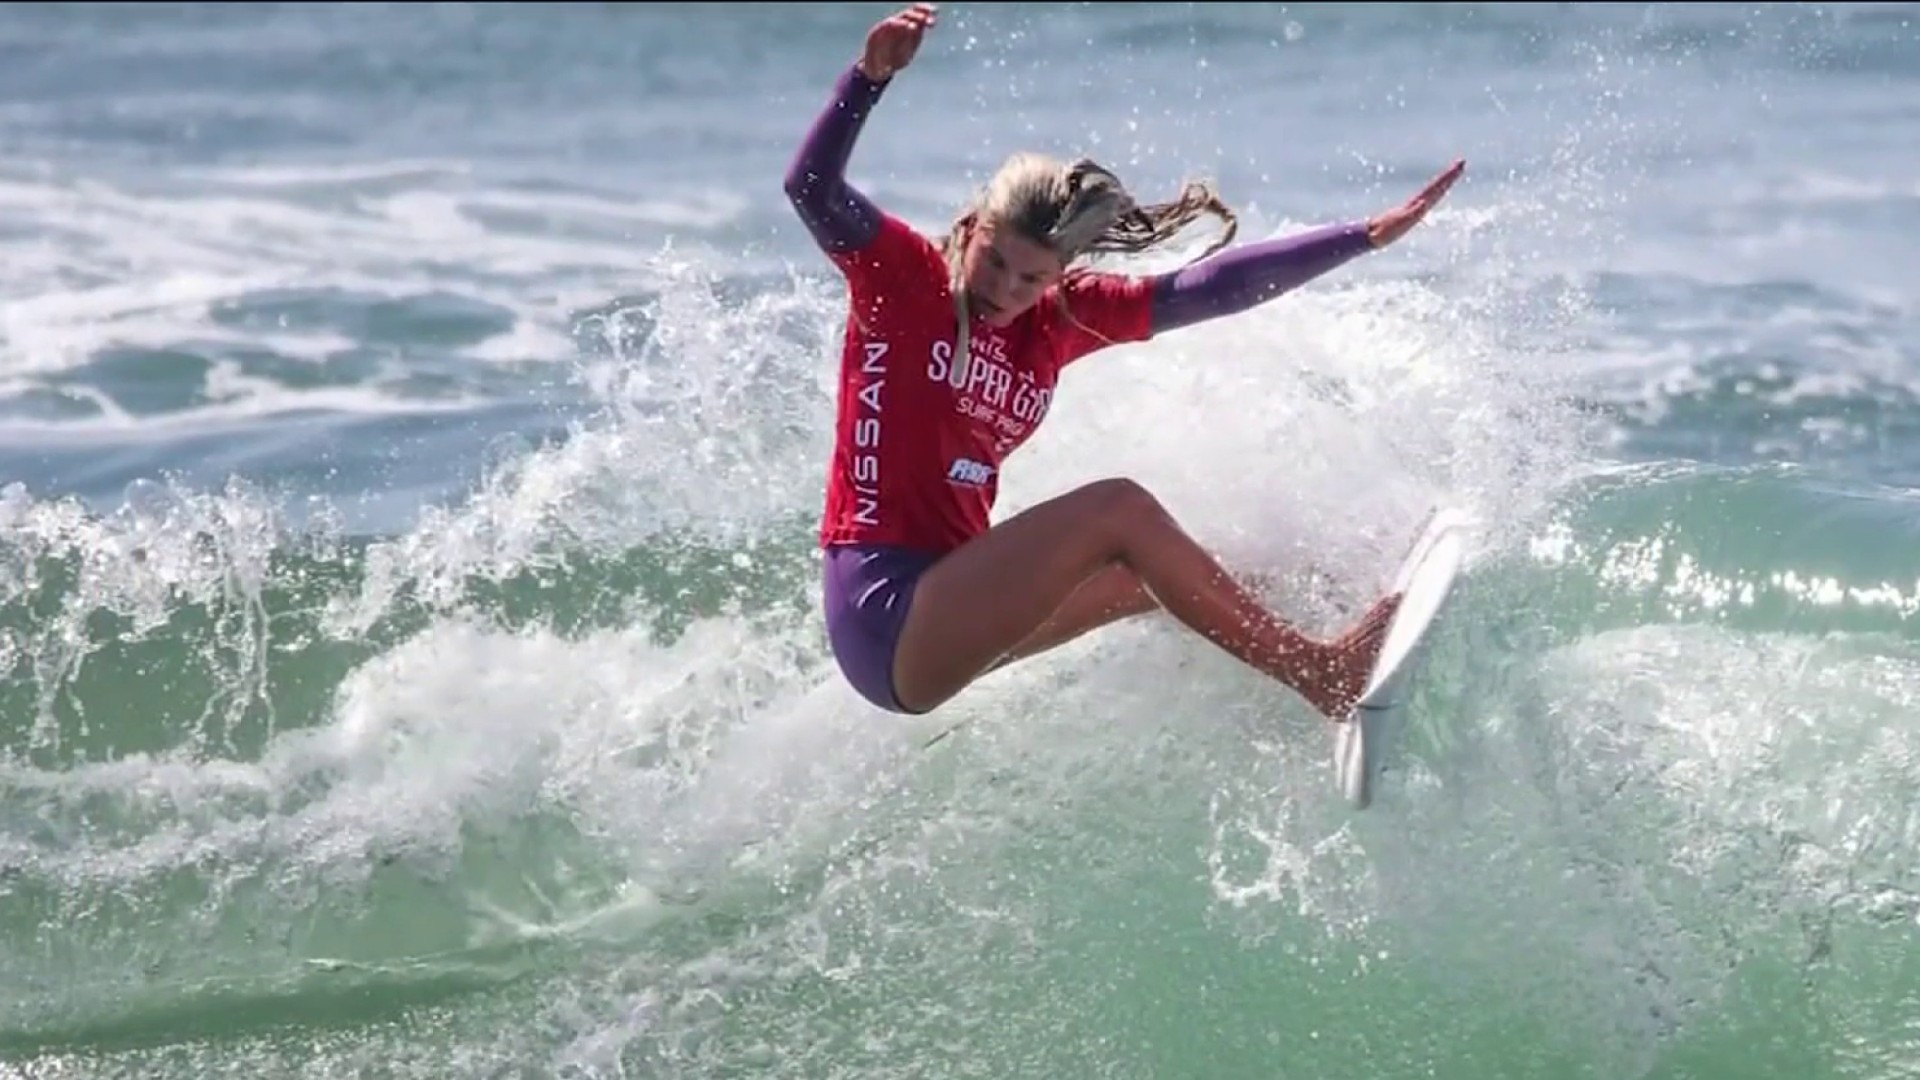 Super Girl Surf Pro: Jacksonville Beach waves show up for surf contest